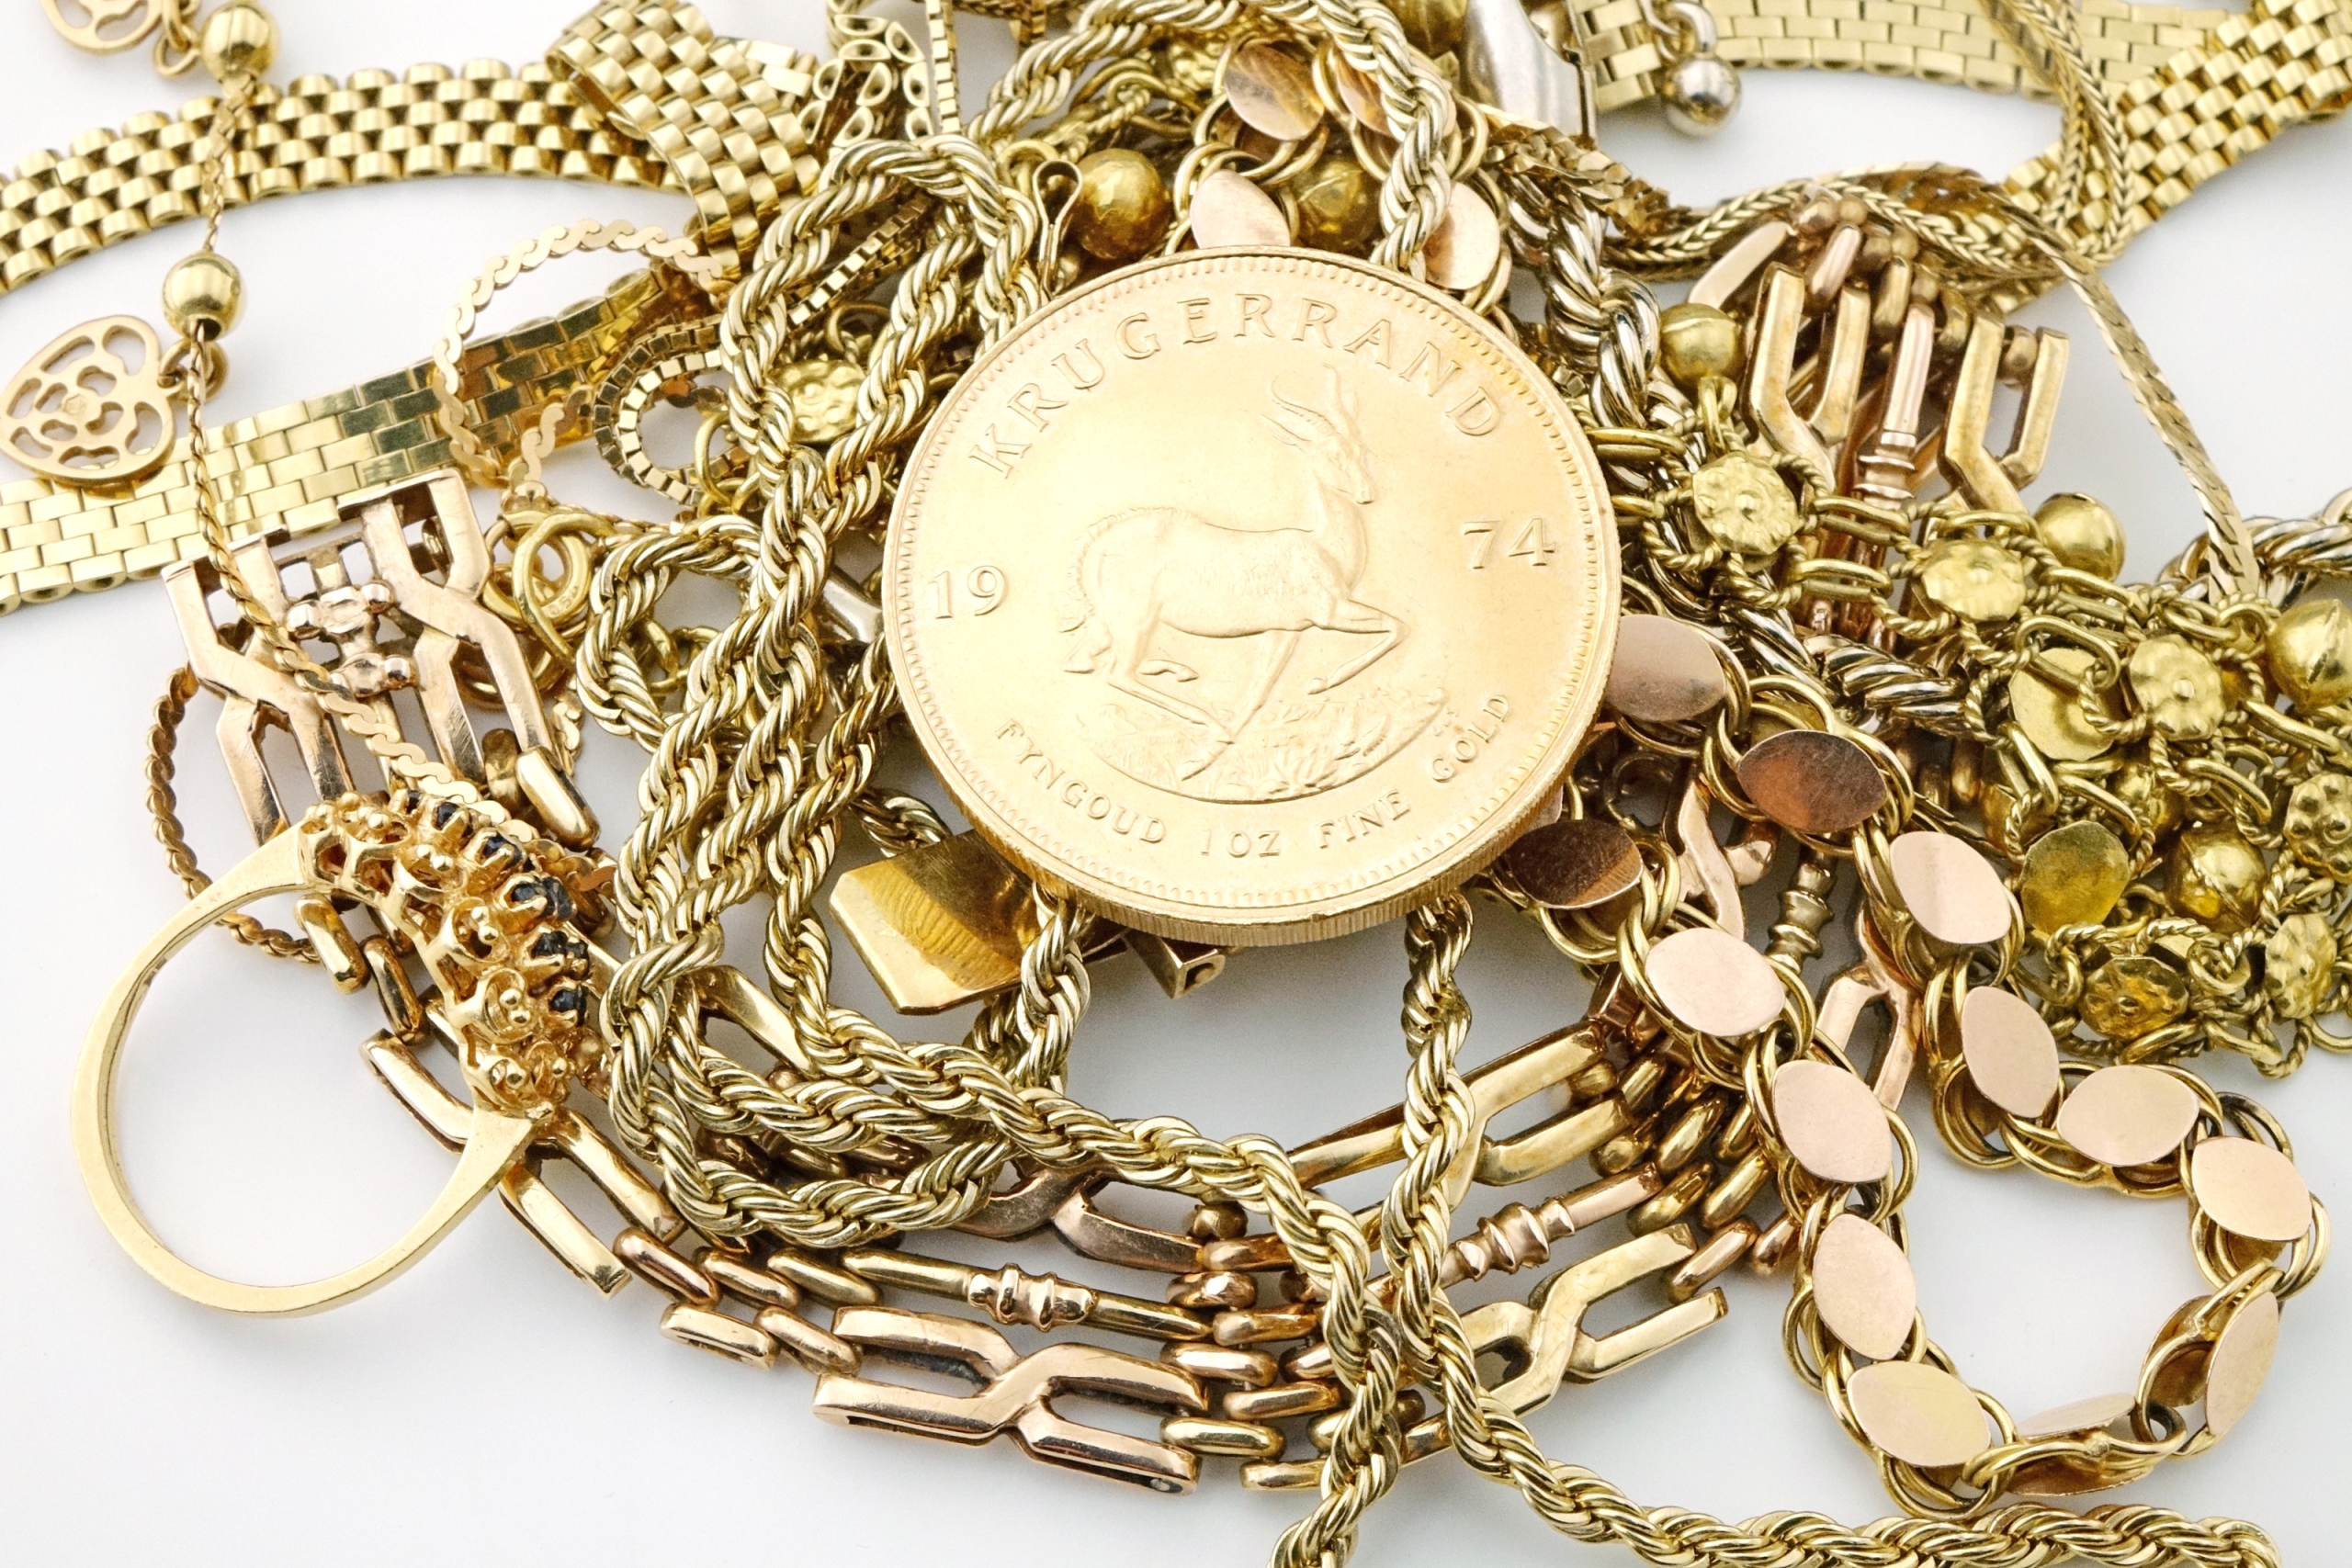 Bootie's Pawn and Jewelry pays top dollar every day for used, broken and unwanted gold jewelry.